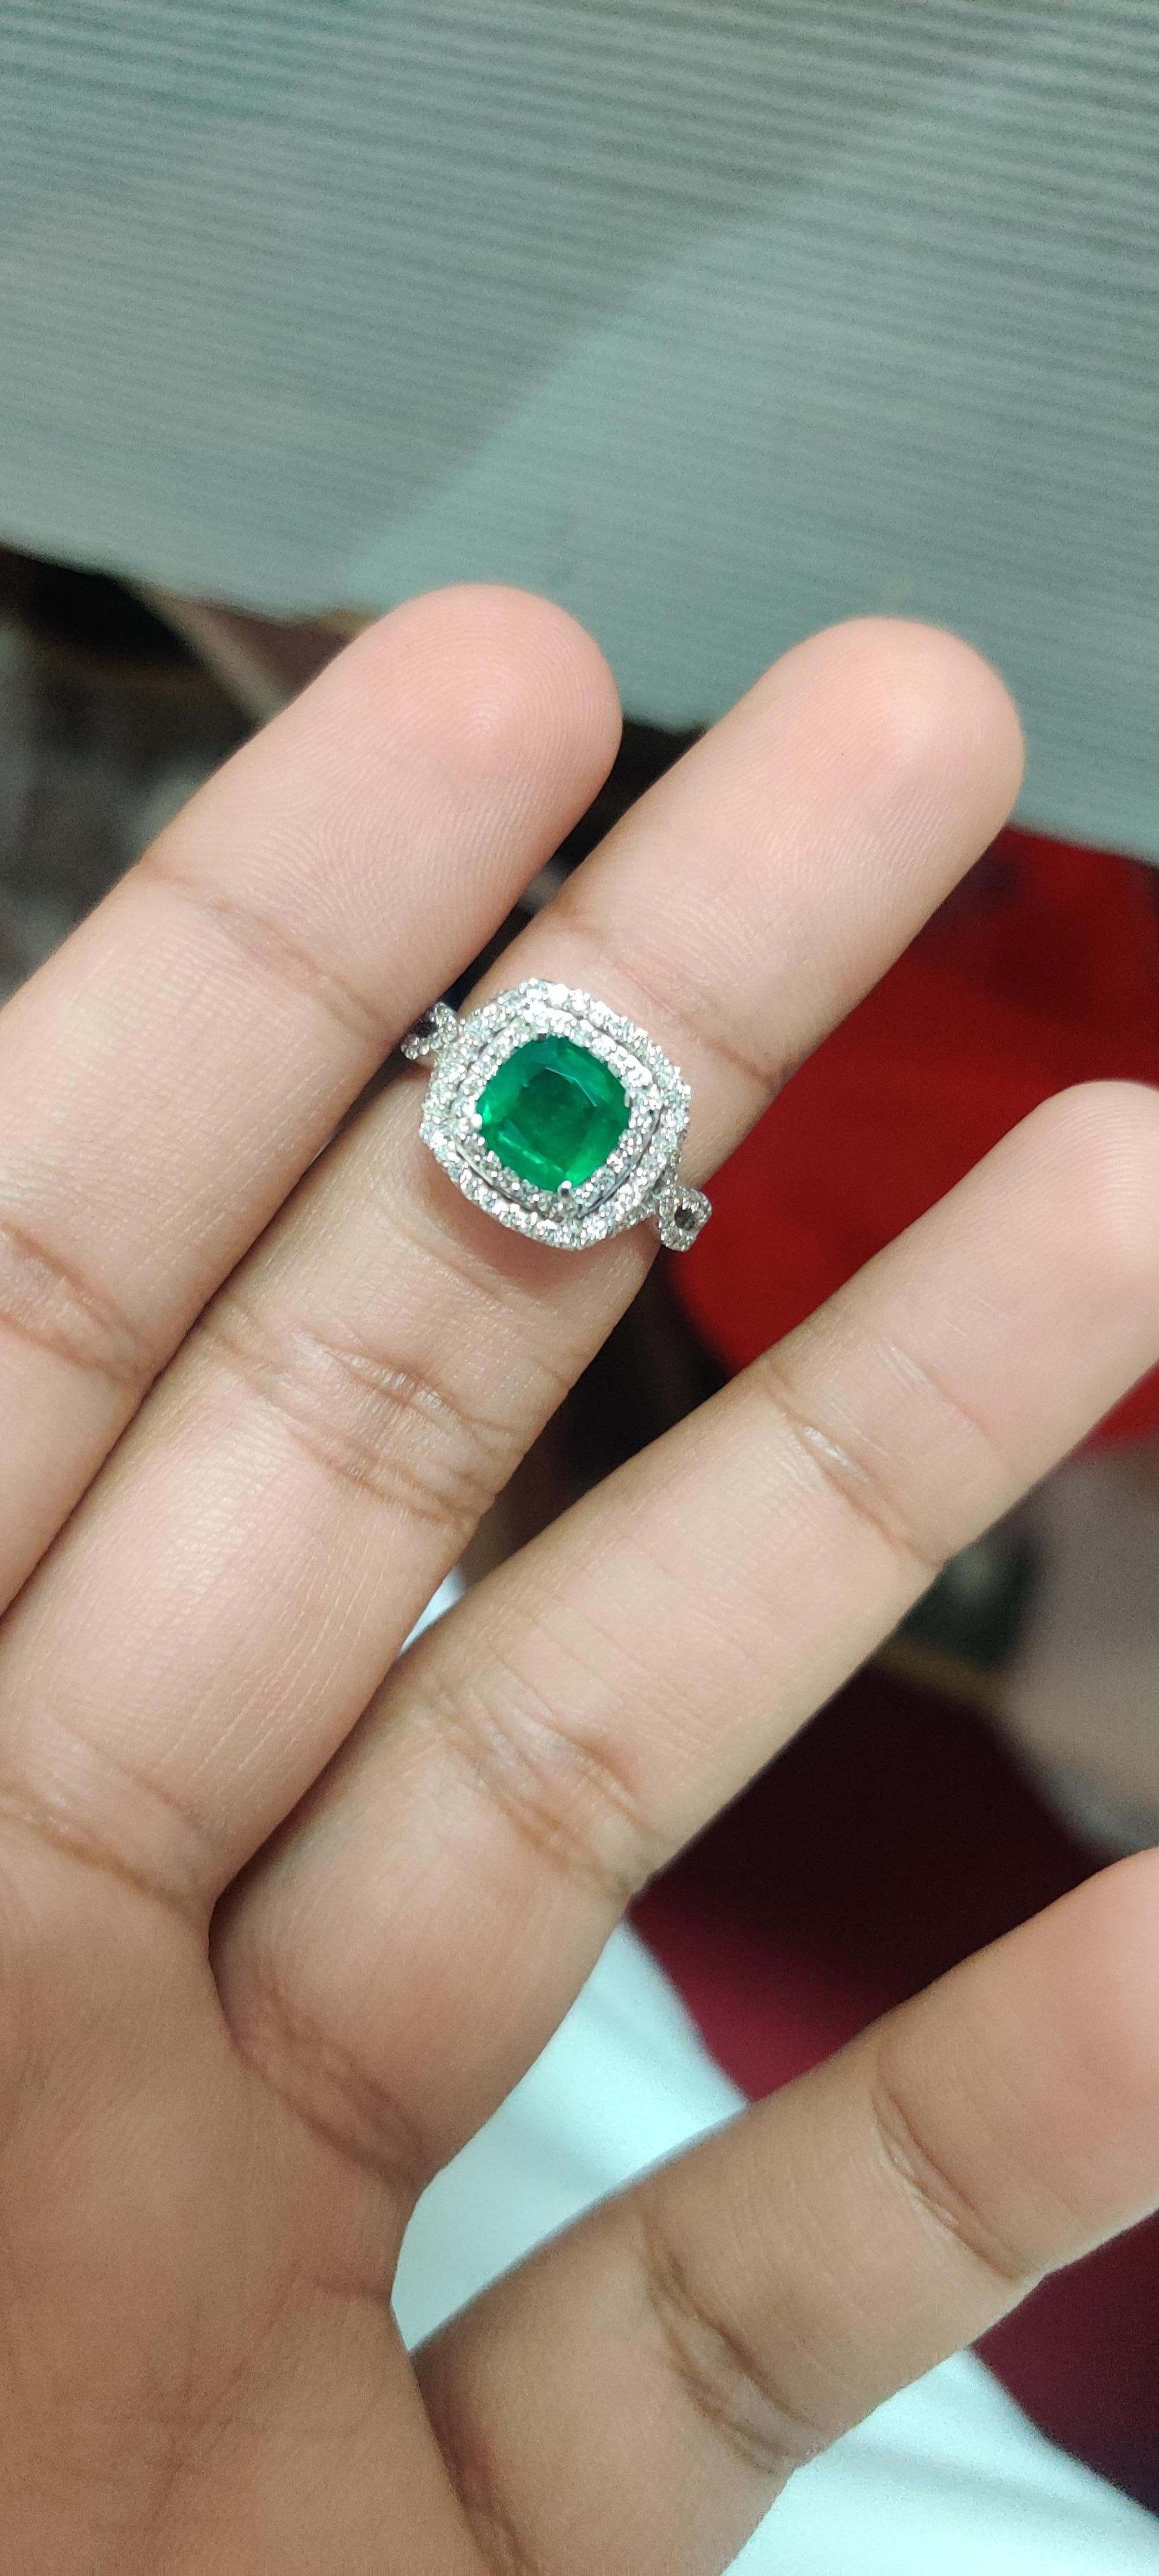 1.26 Carat Emerald with Halo Diamonds 18K White Gold Ring For Sale 3